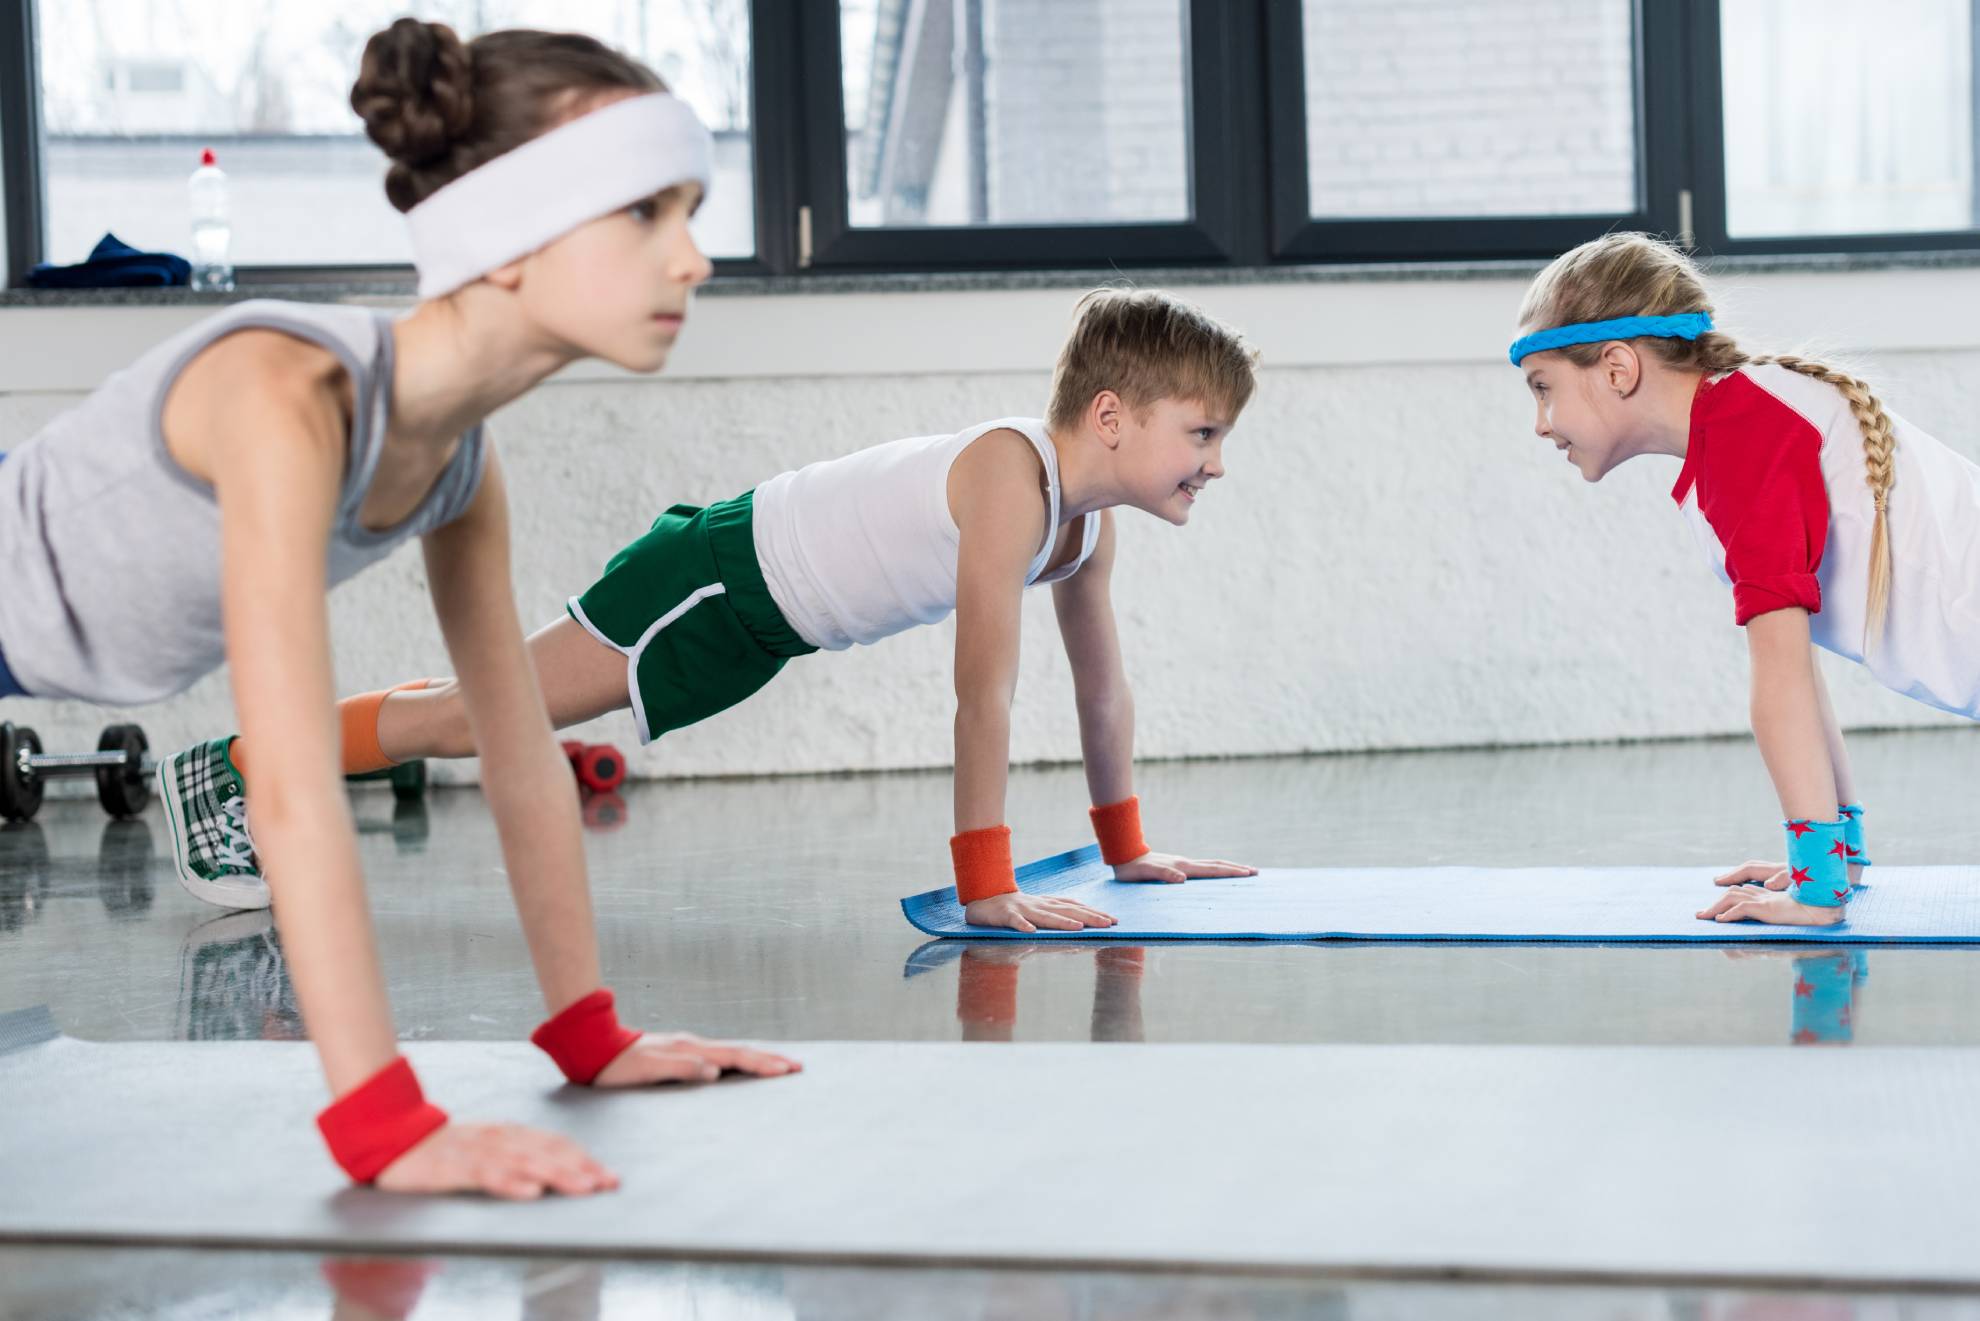 cute-sporty-kids-exercising-on-yoga-mats-in-gym-an-2021-08-29-10-47-54-utc (1)